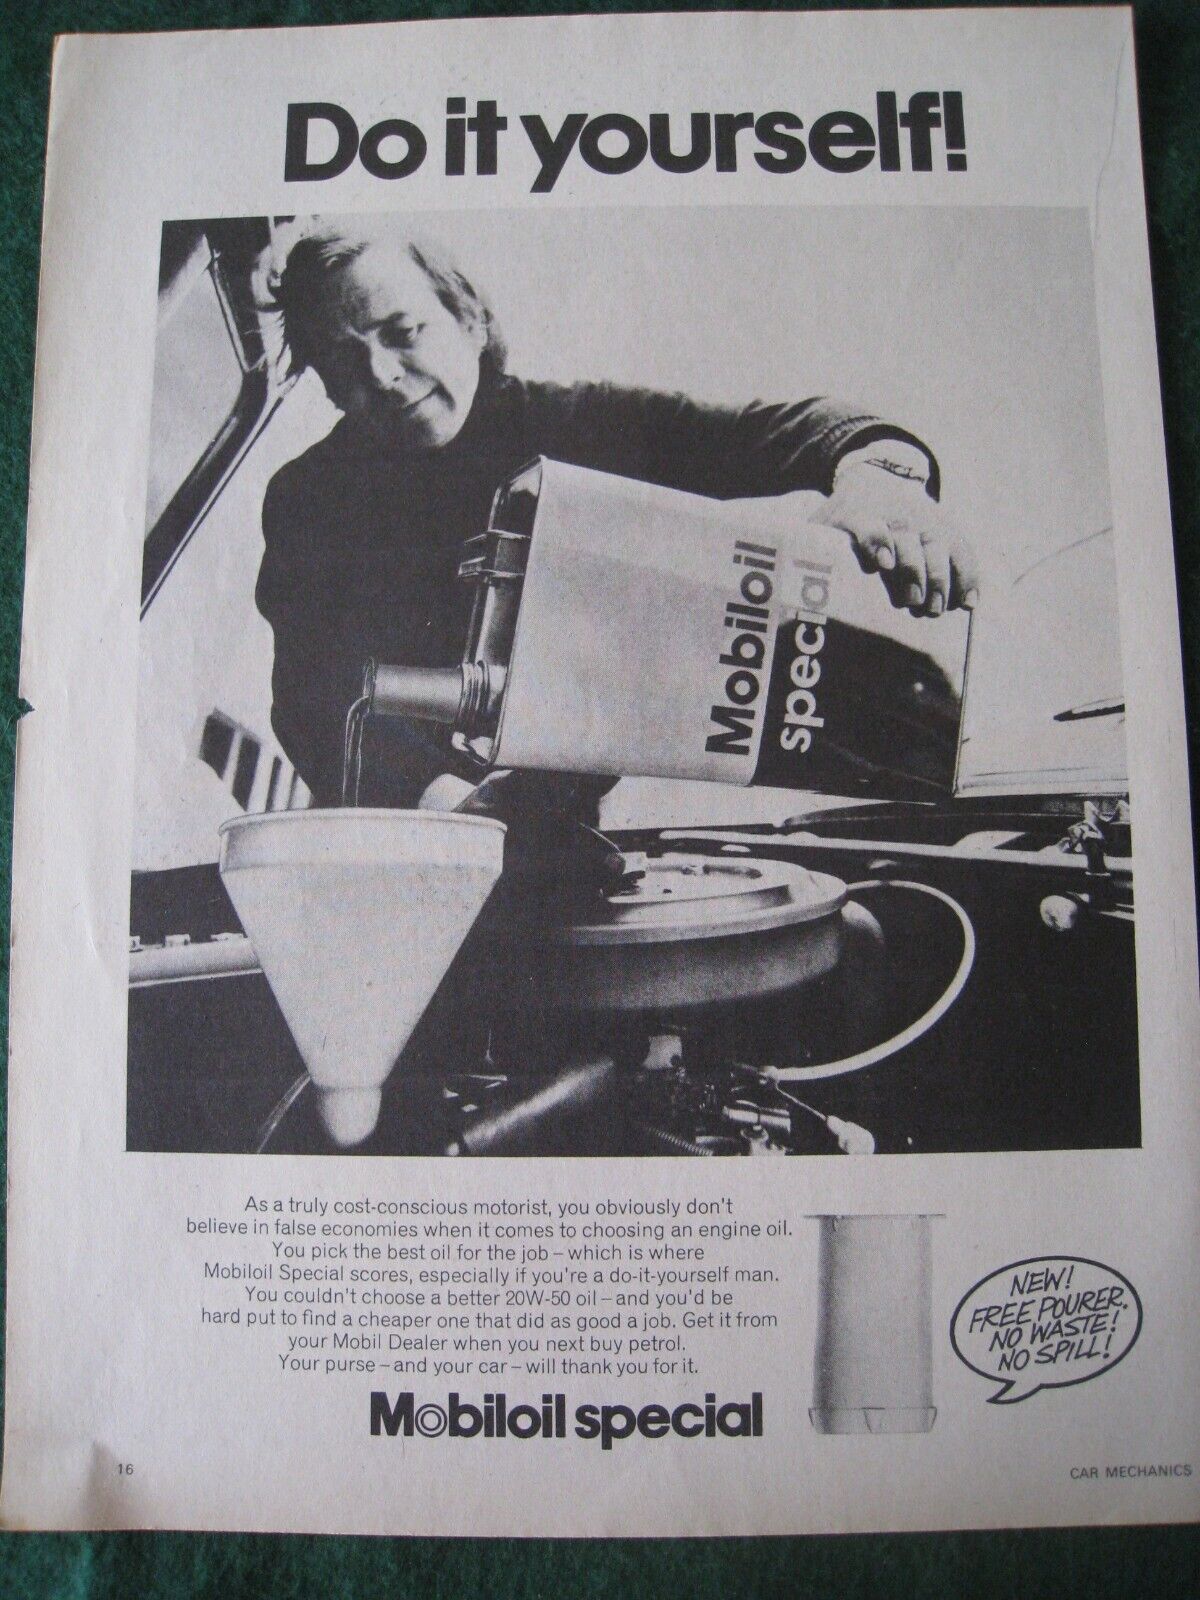 MOBILOIL SPECIAL DO IT YOURSELF COST-CONCIOUS MOTORIST 1971 ADVERT A4 FILE 29